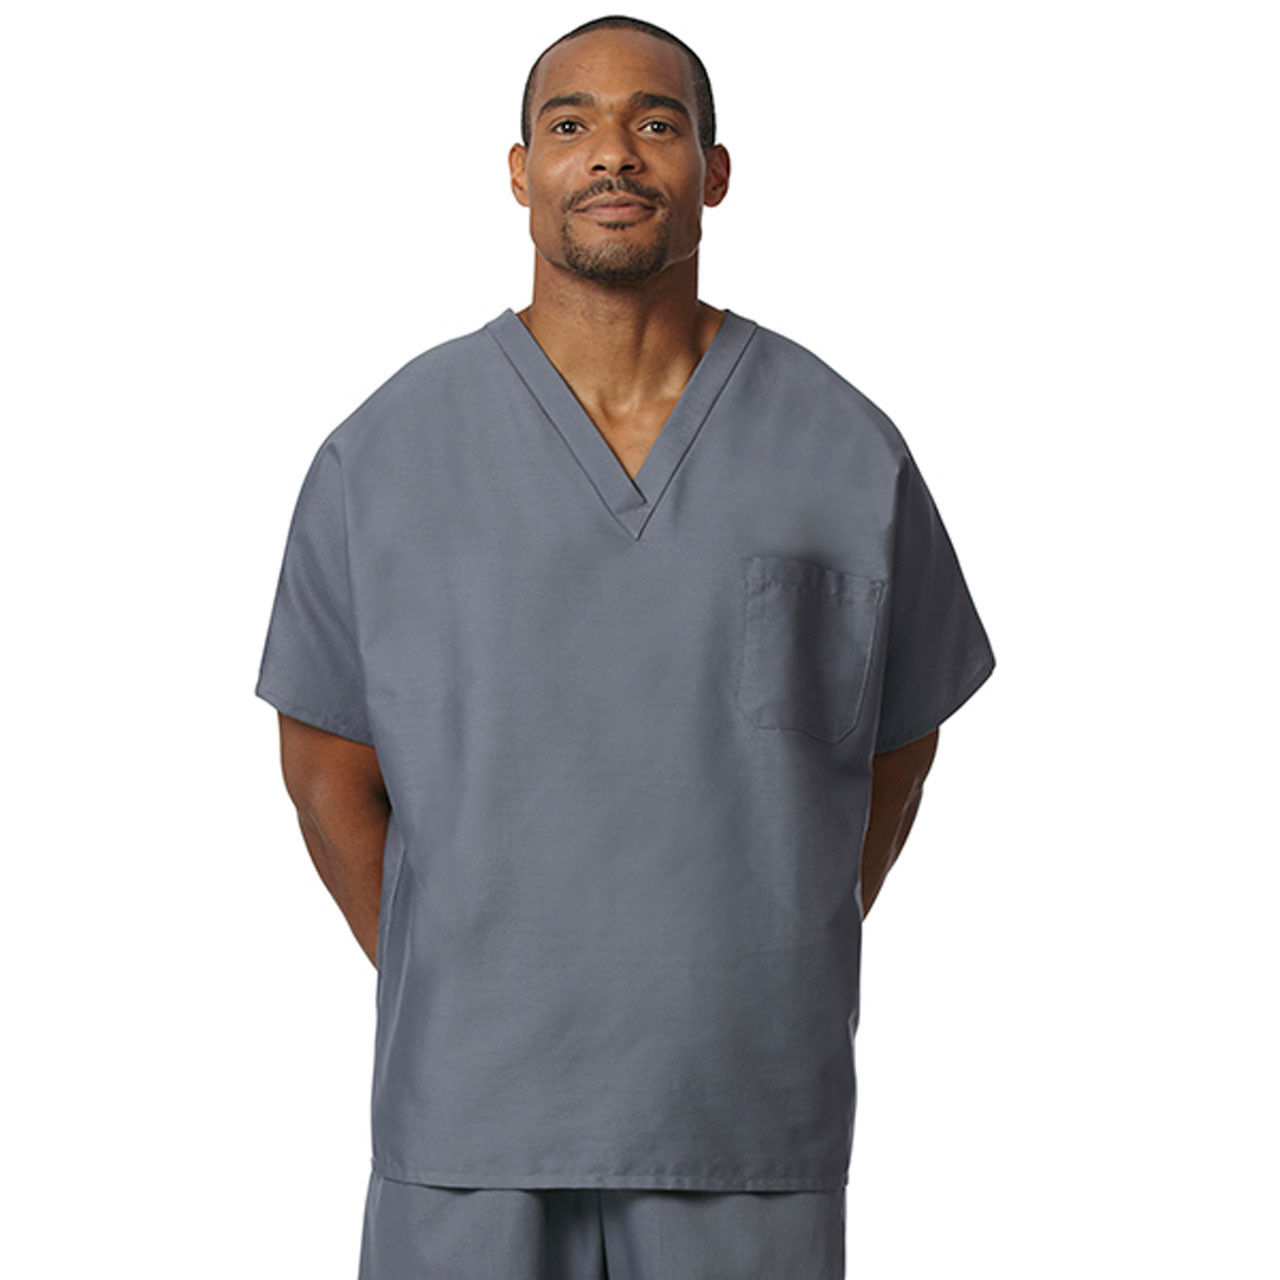 Can the Gray Scrub Tops be worn in different professional settings?